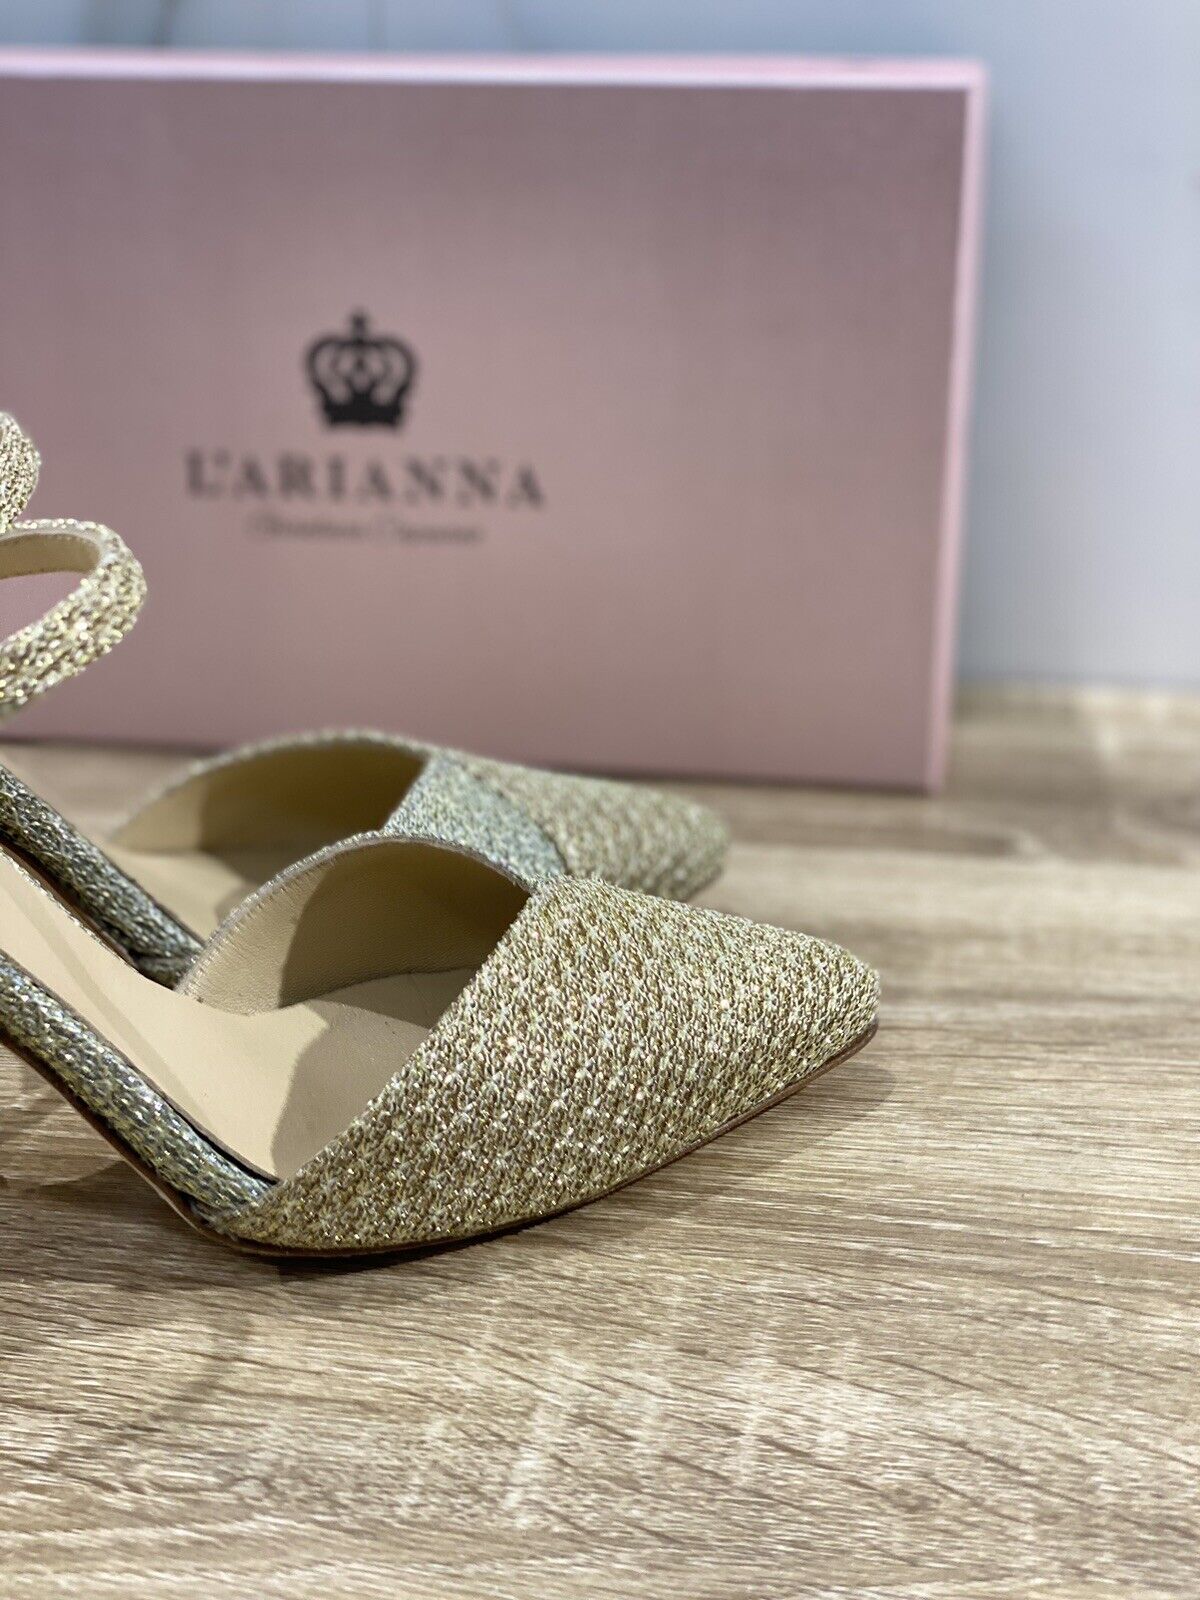 L’ARIANNA Sling Back Donna Luxury Gold Platino Con Tacco 37.5